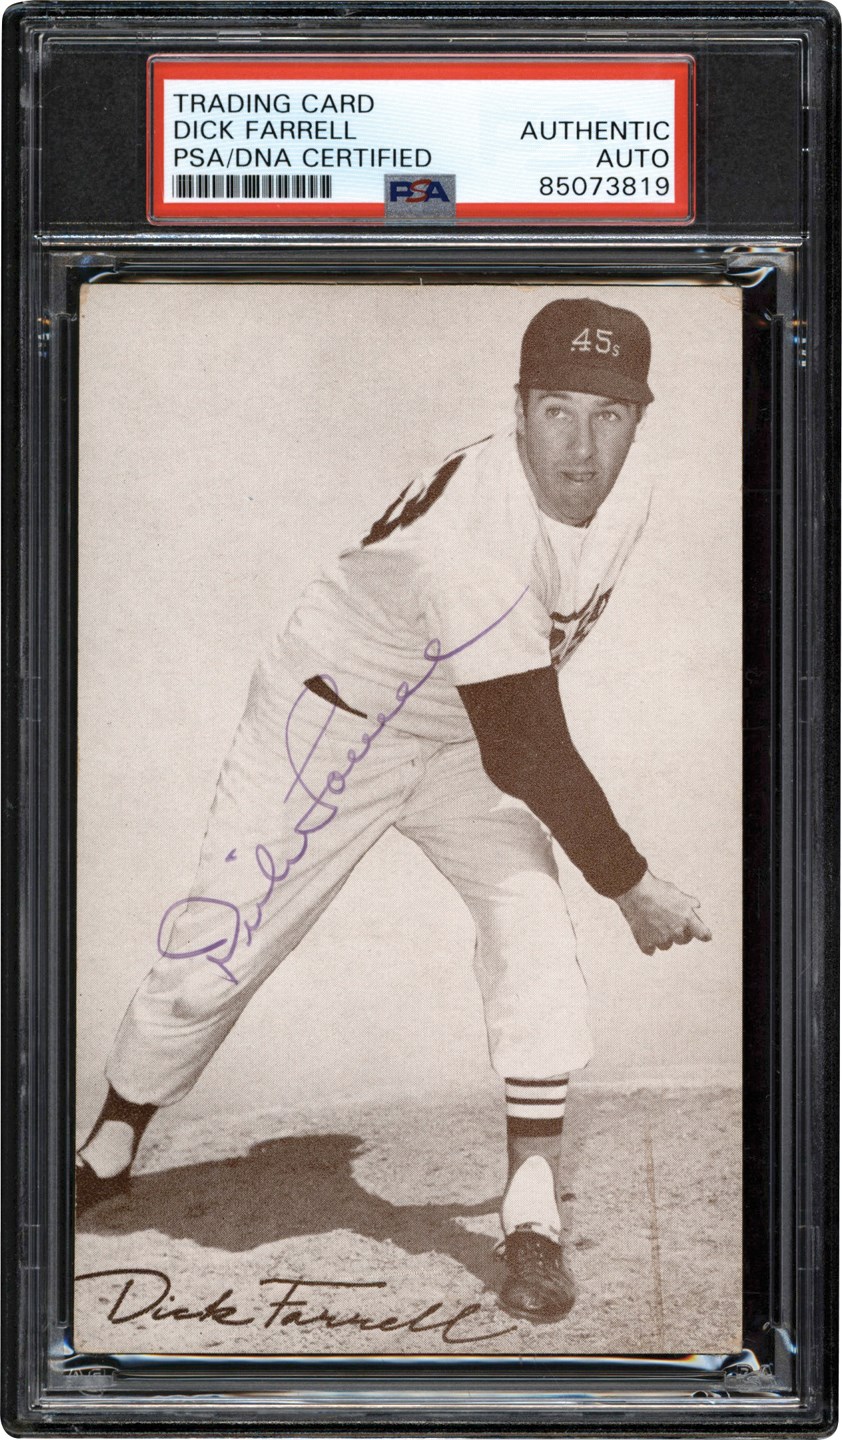 - 1963 Stat Back Exhibit Dick Farrell Signed Card PSA Authentic